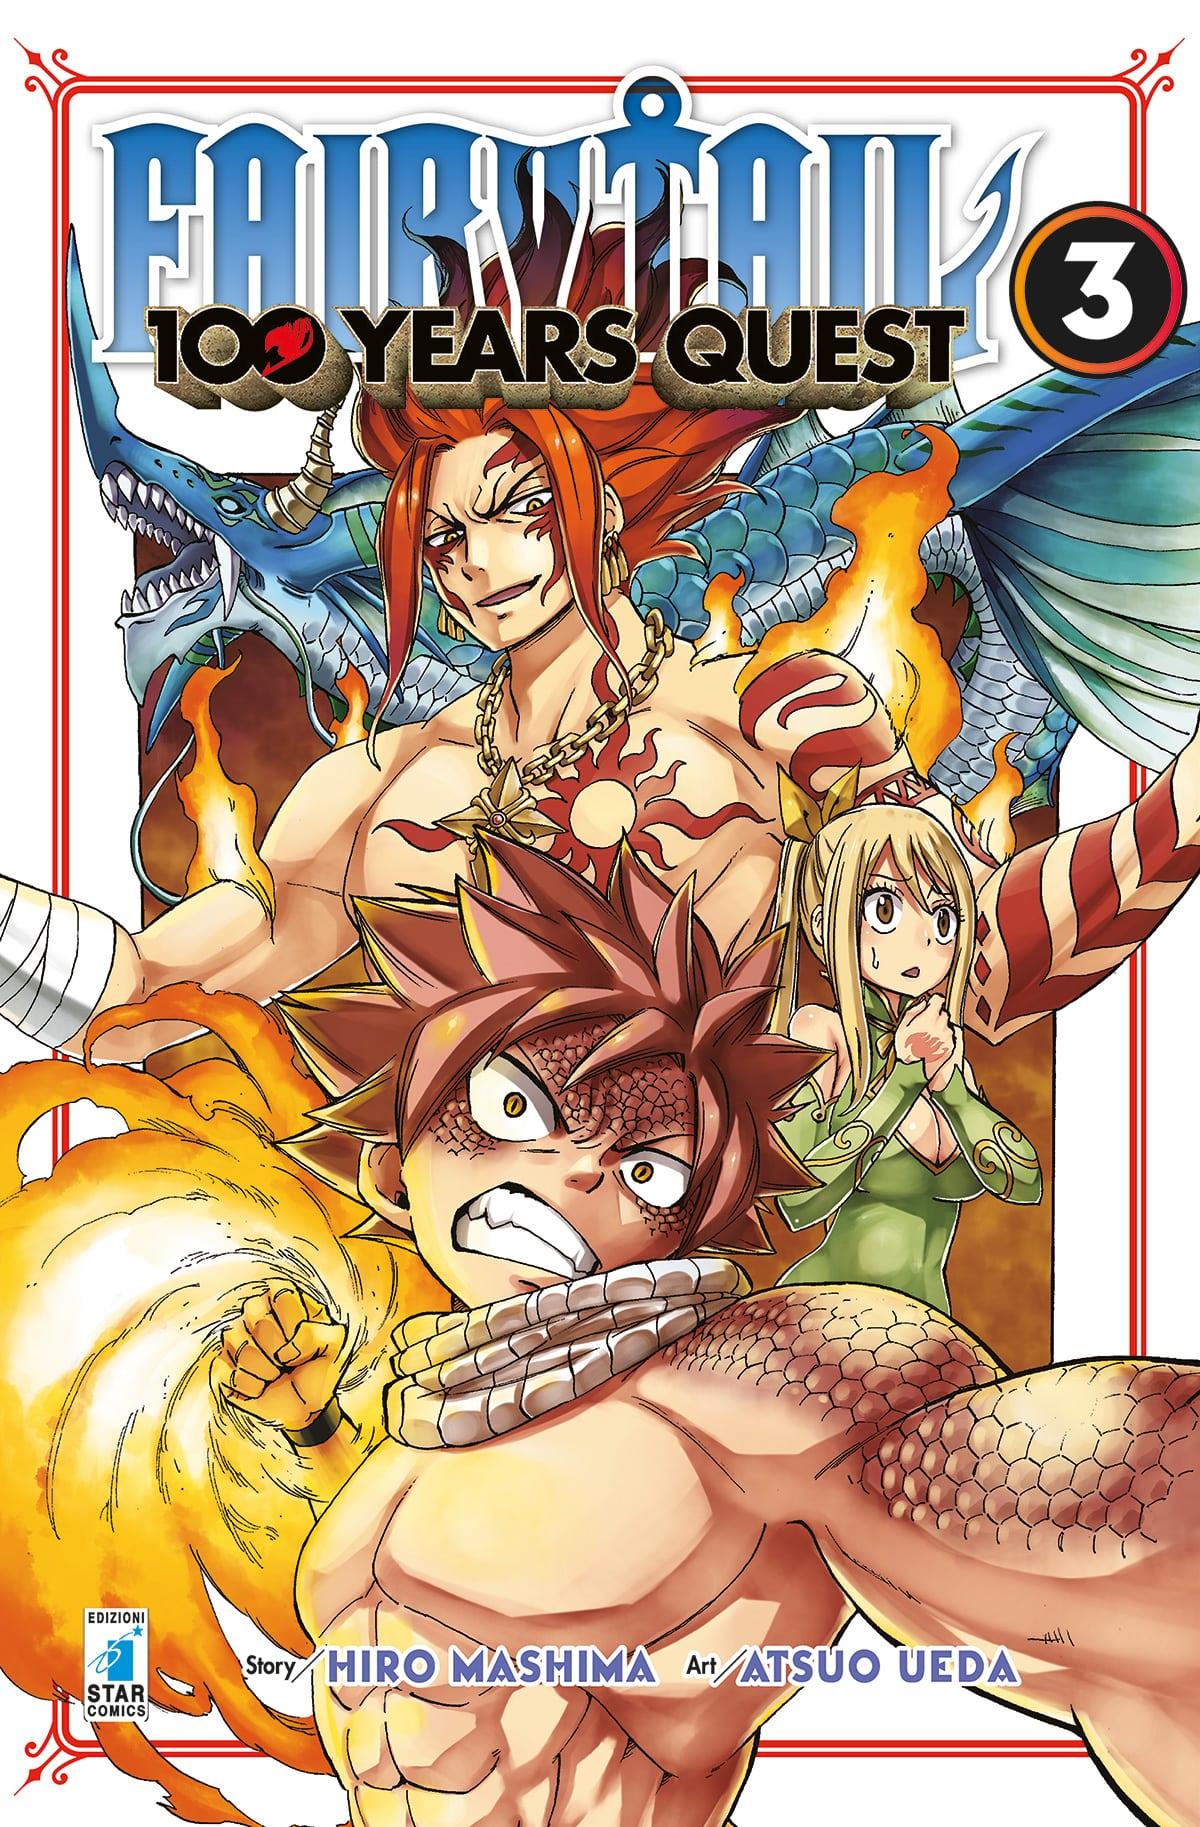 YOUNG #310 FAIRY TAIL 100 YEARS QUEST N.03